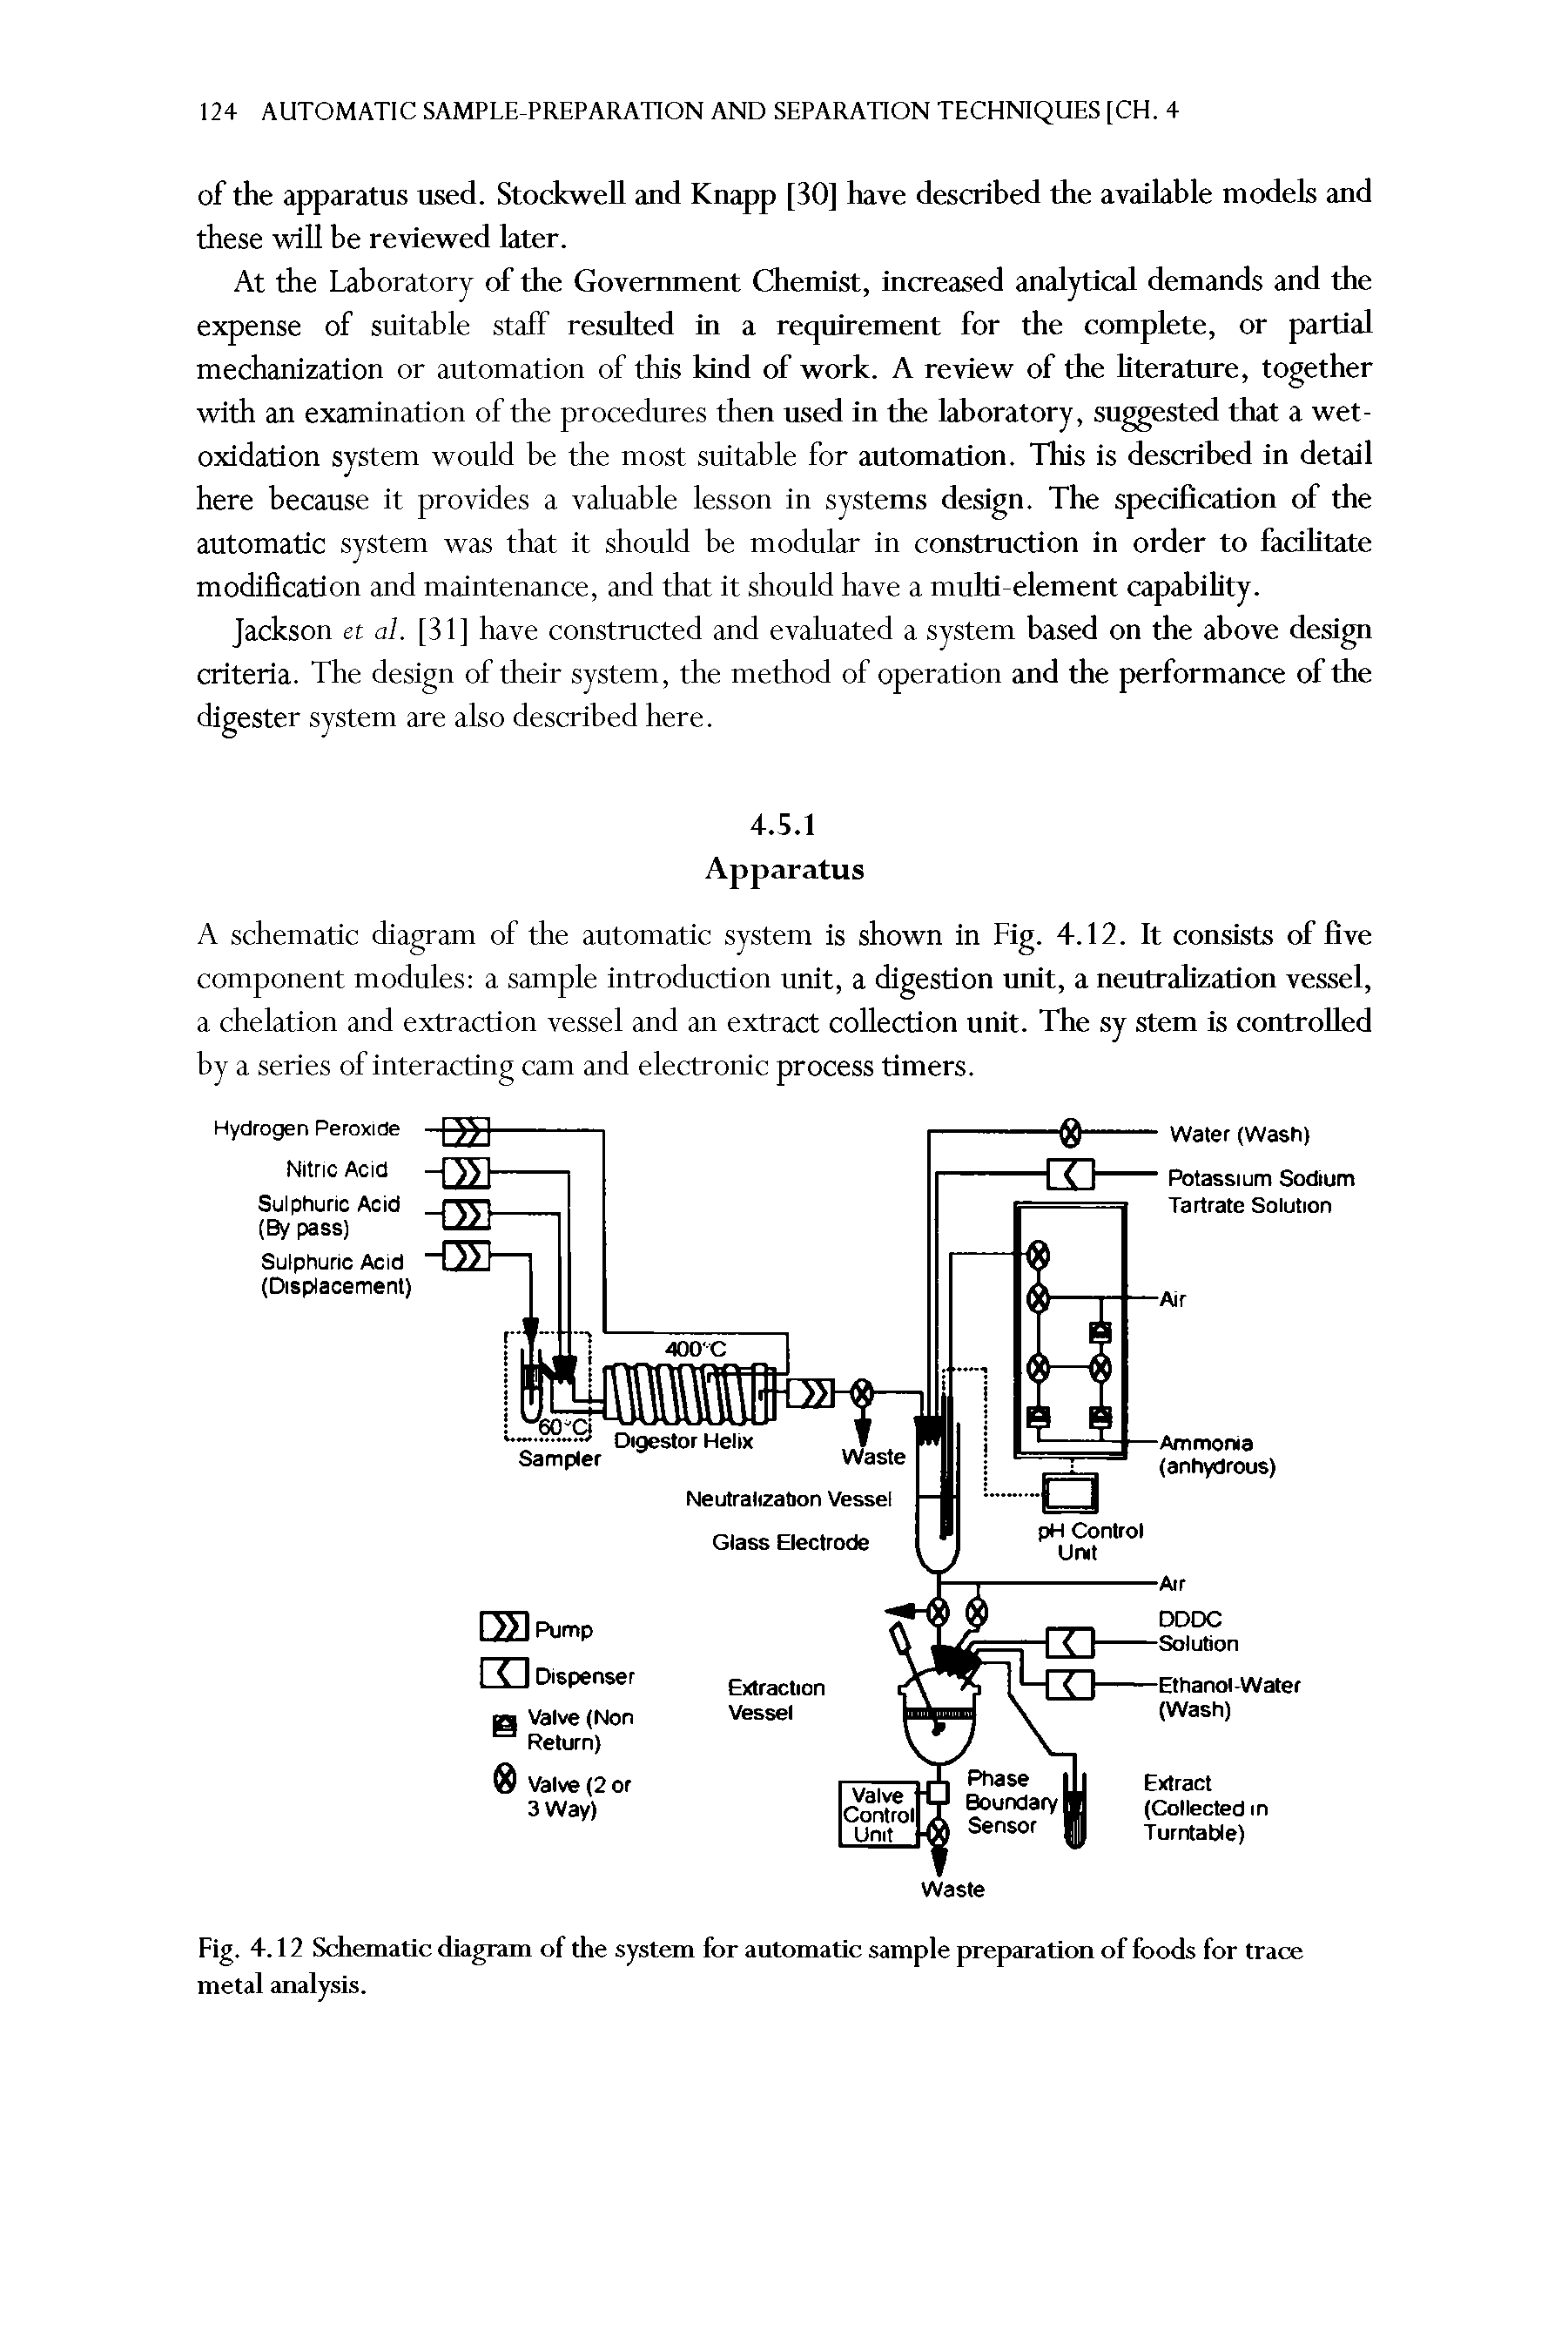 Fig. 4.12 Schematic diagram of the system for automatic sample preparation of foods for trace metal analysis.